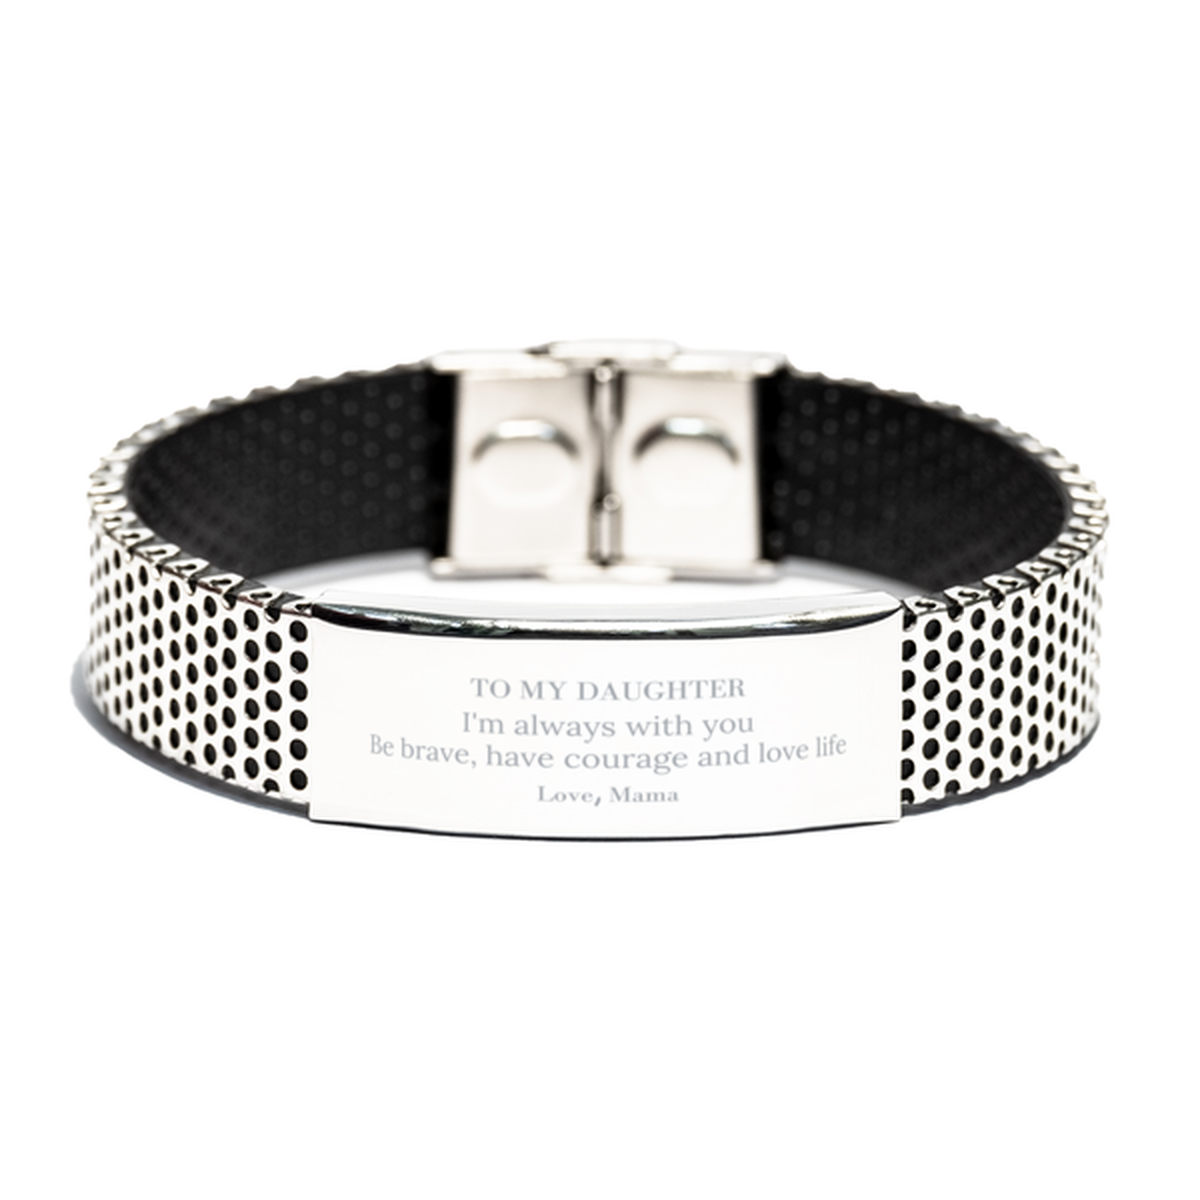 To My Daughter Gifts from Mama, Unique Stainless Steel Bracelet Inspirational Christmas Birthday Graduation Gifts for Daughter I'm always with you. Be brave, have courage and love life. Love, Mama